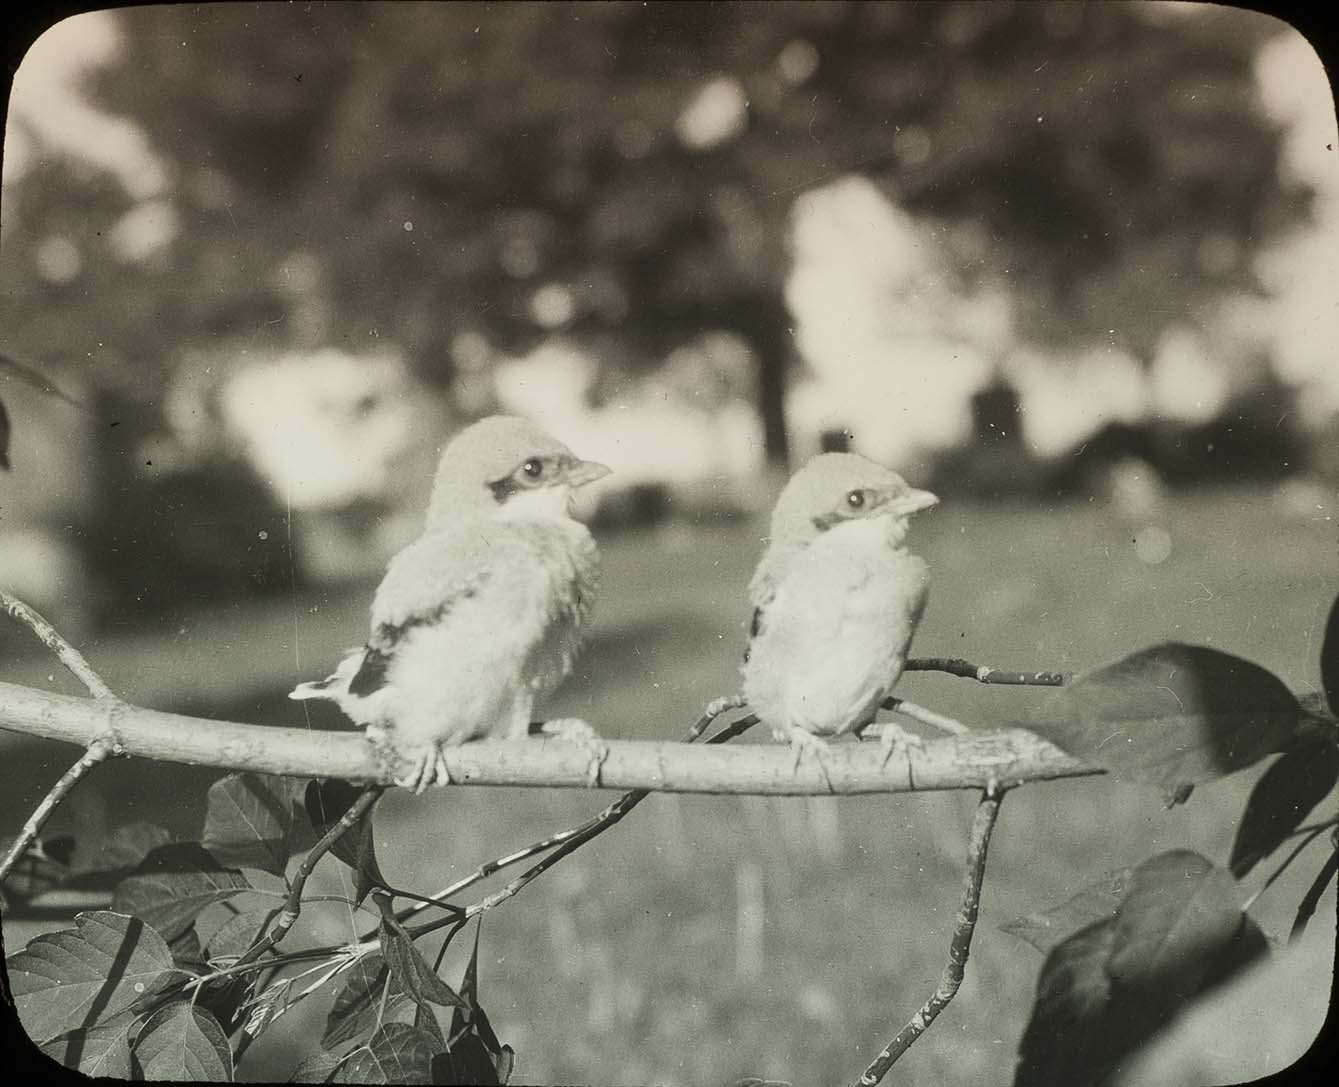 Lantern slide and photograph of two young Shrikes perching on a branch